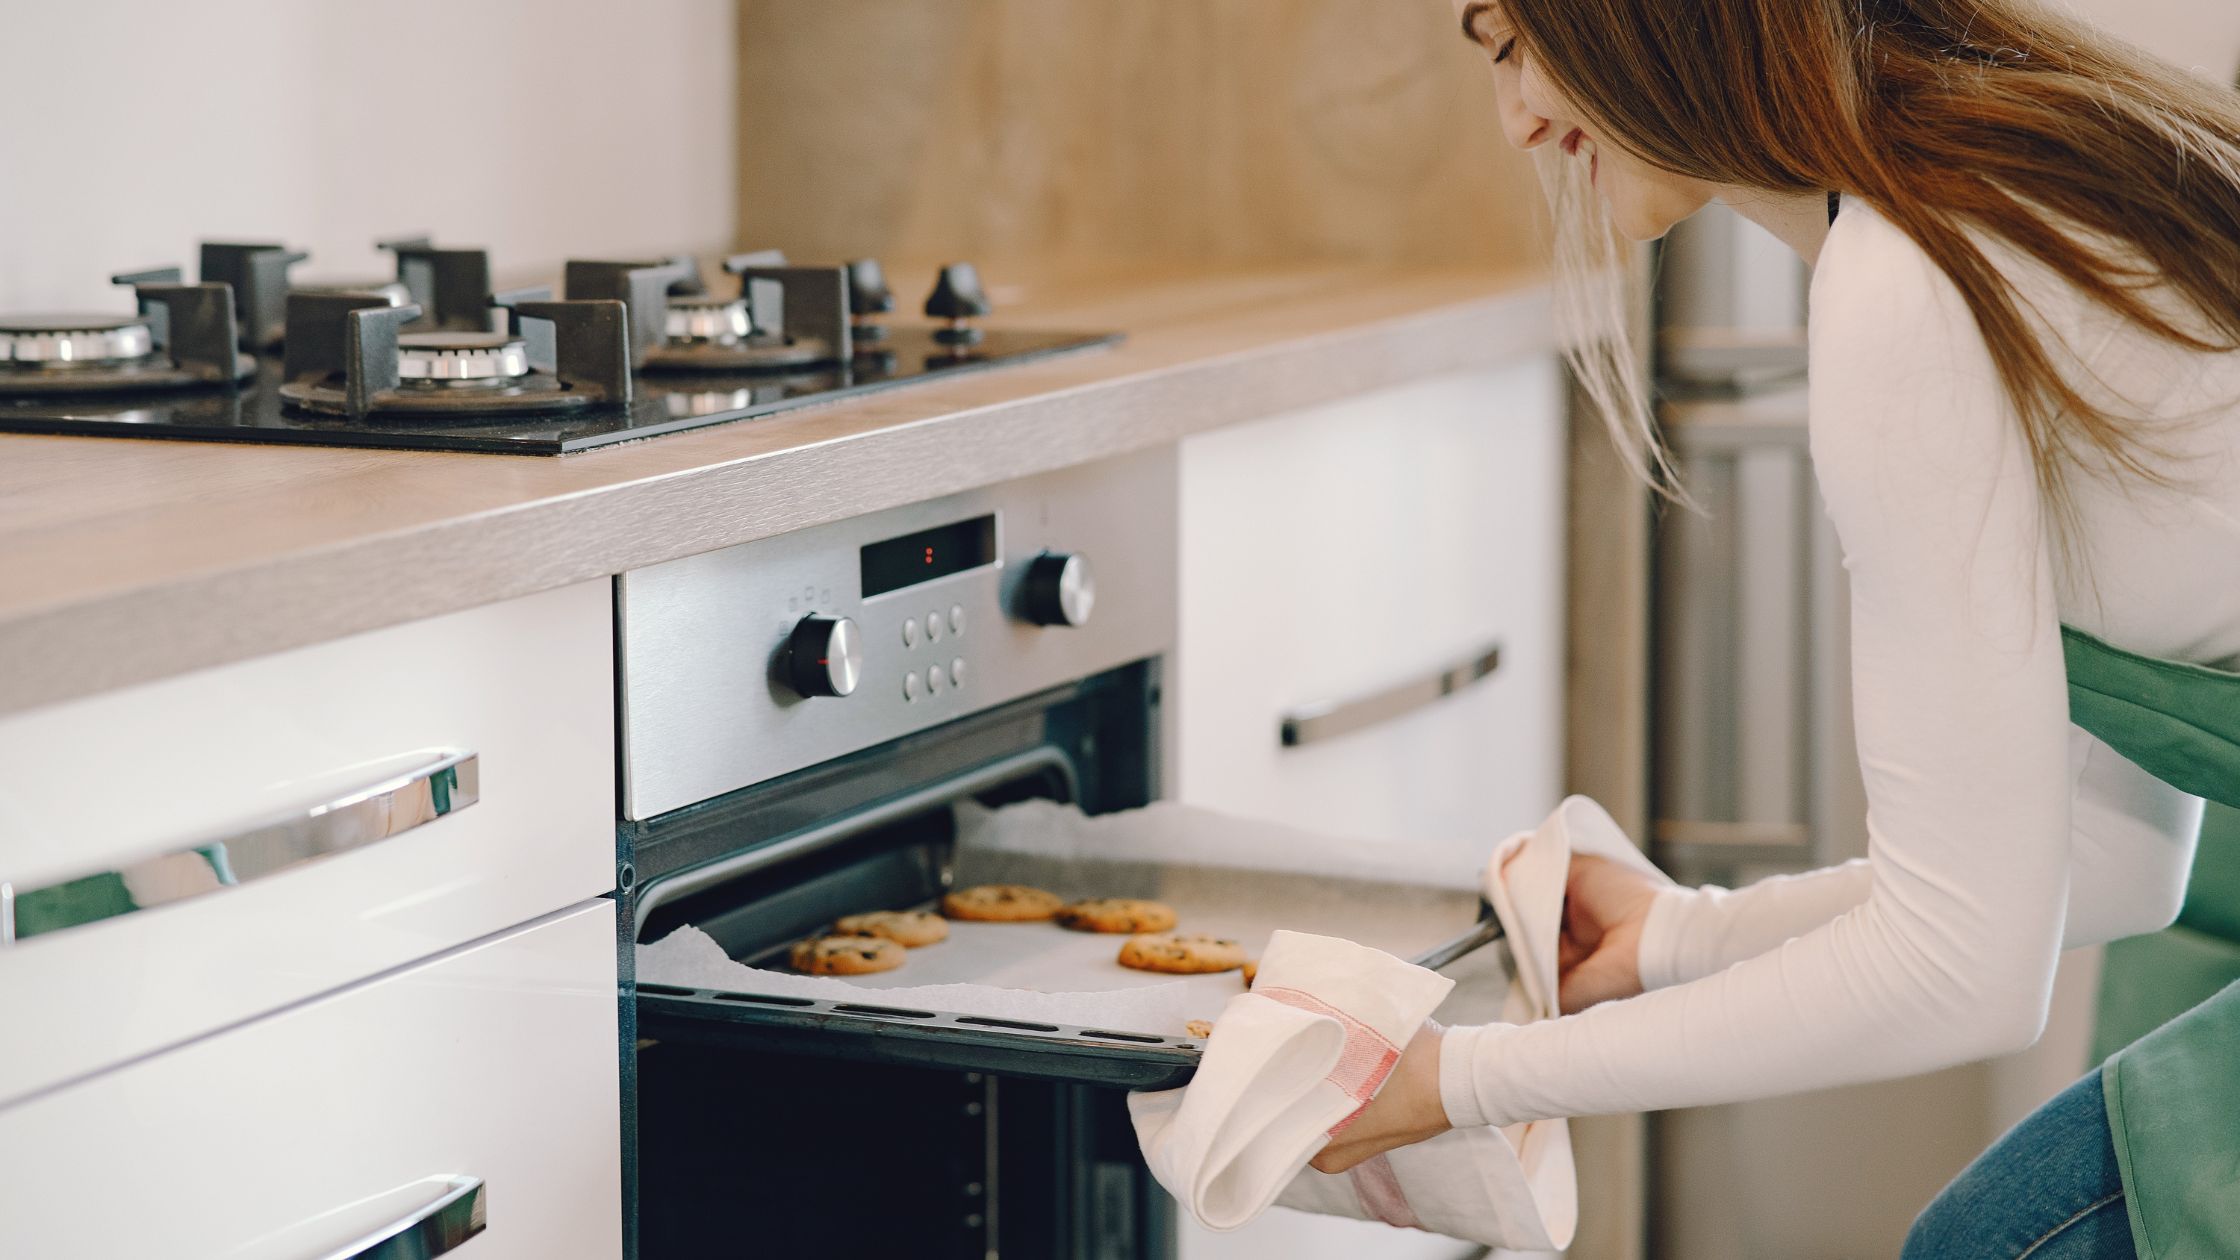 picture of a lady putting baked items in an oven